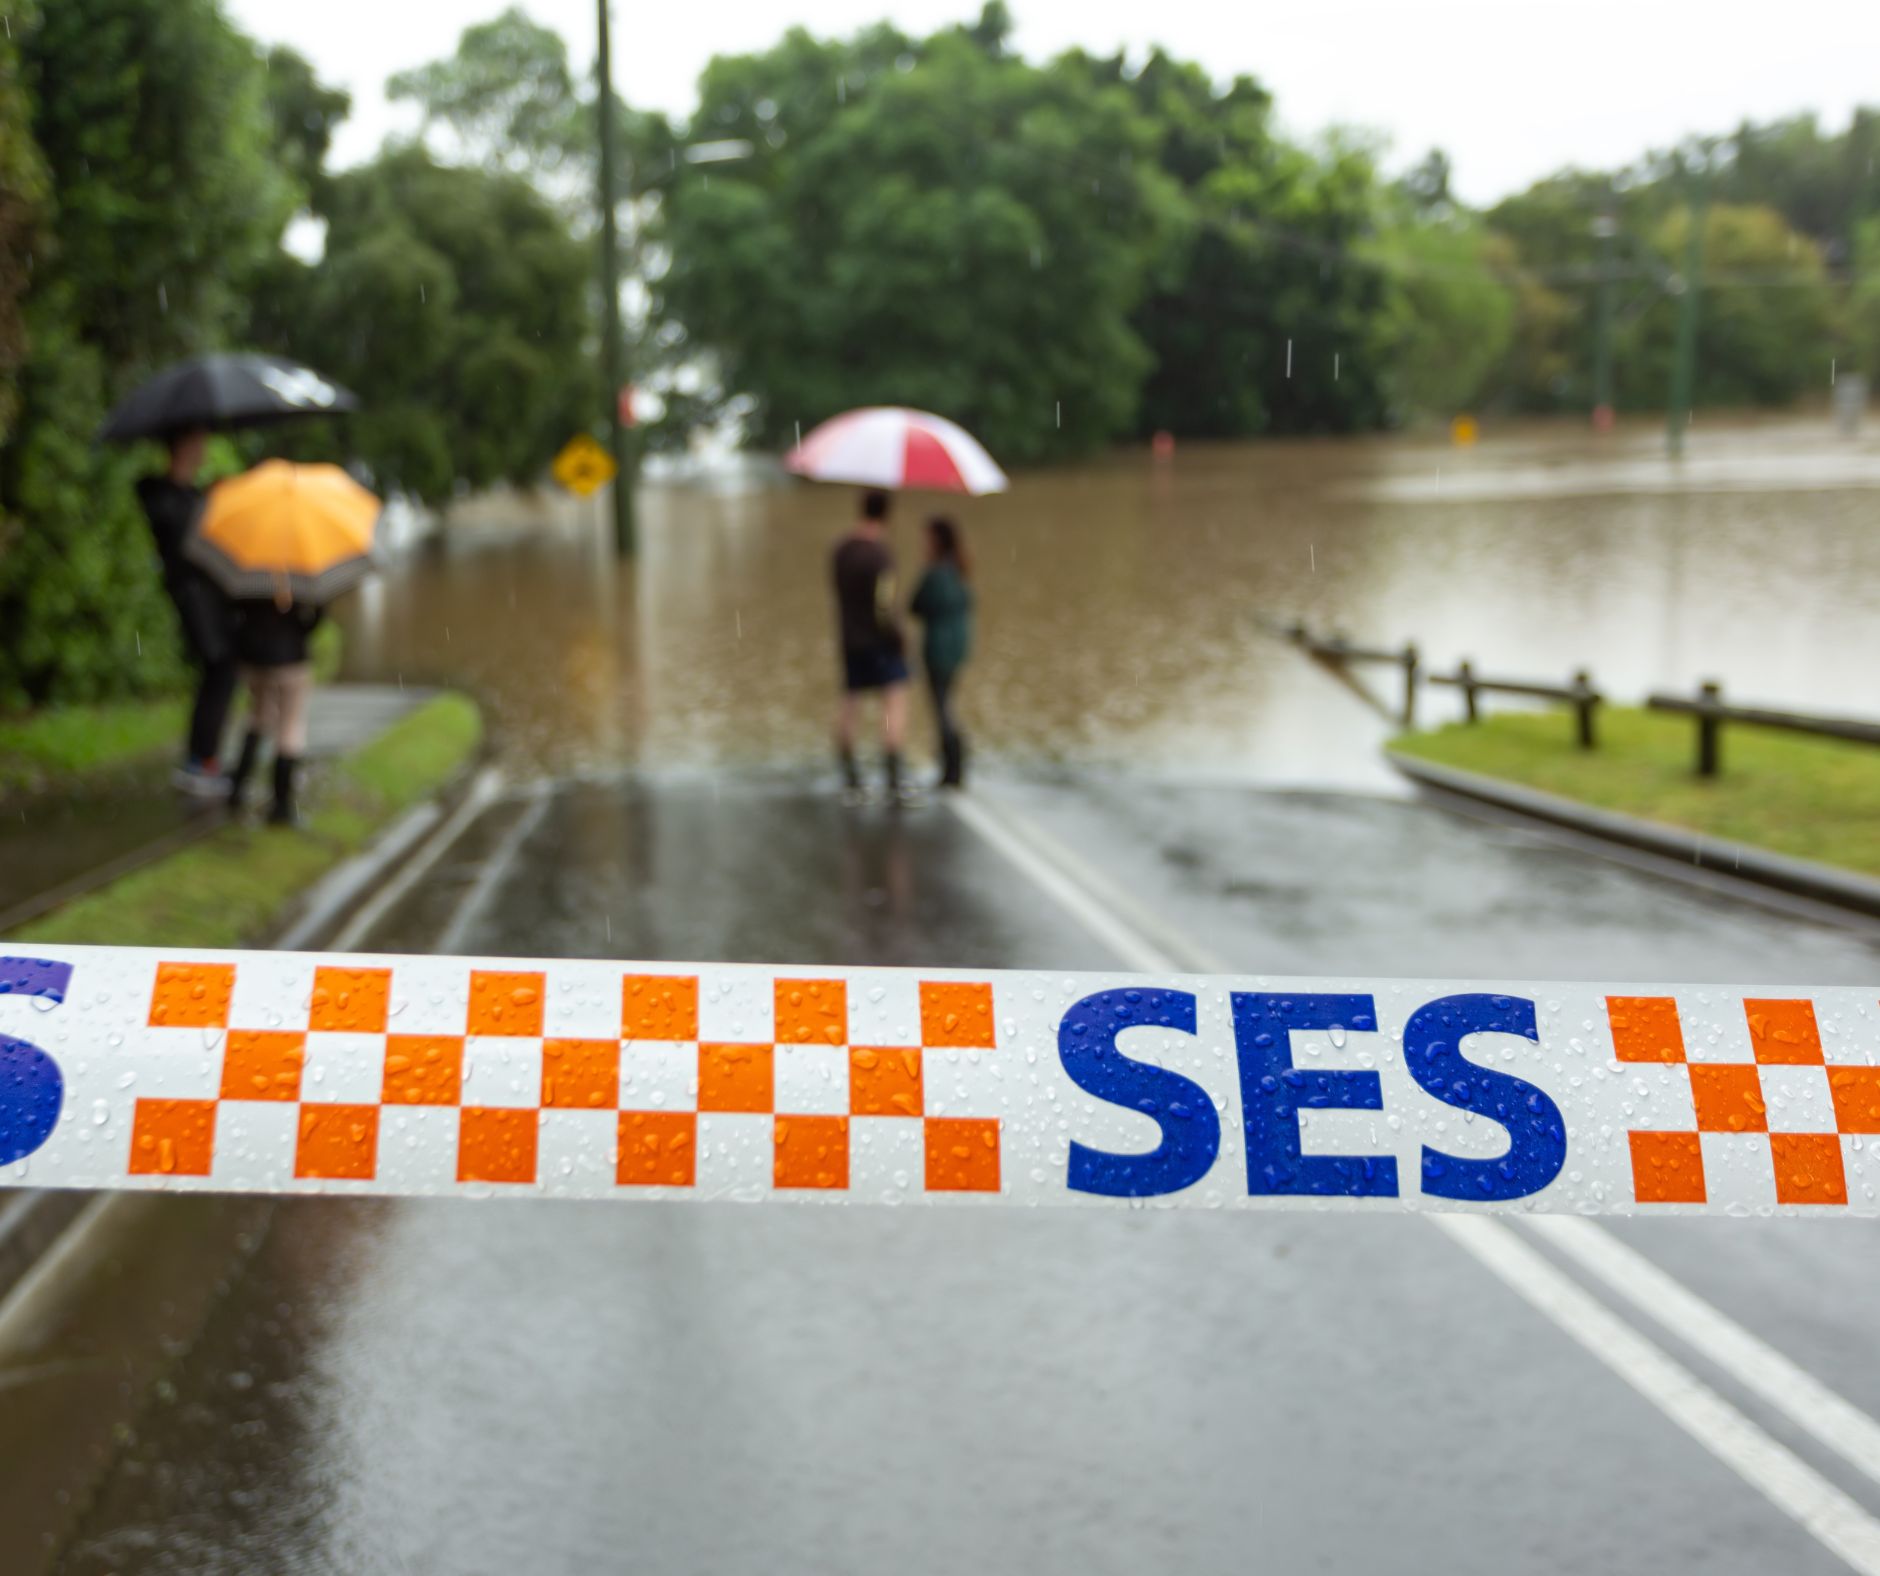 “Climate change is amplifying extreme events” – climate experts respond to Australian floods